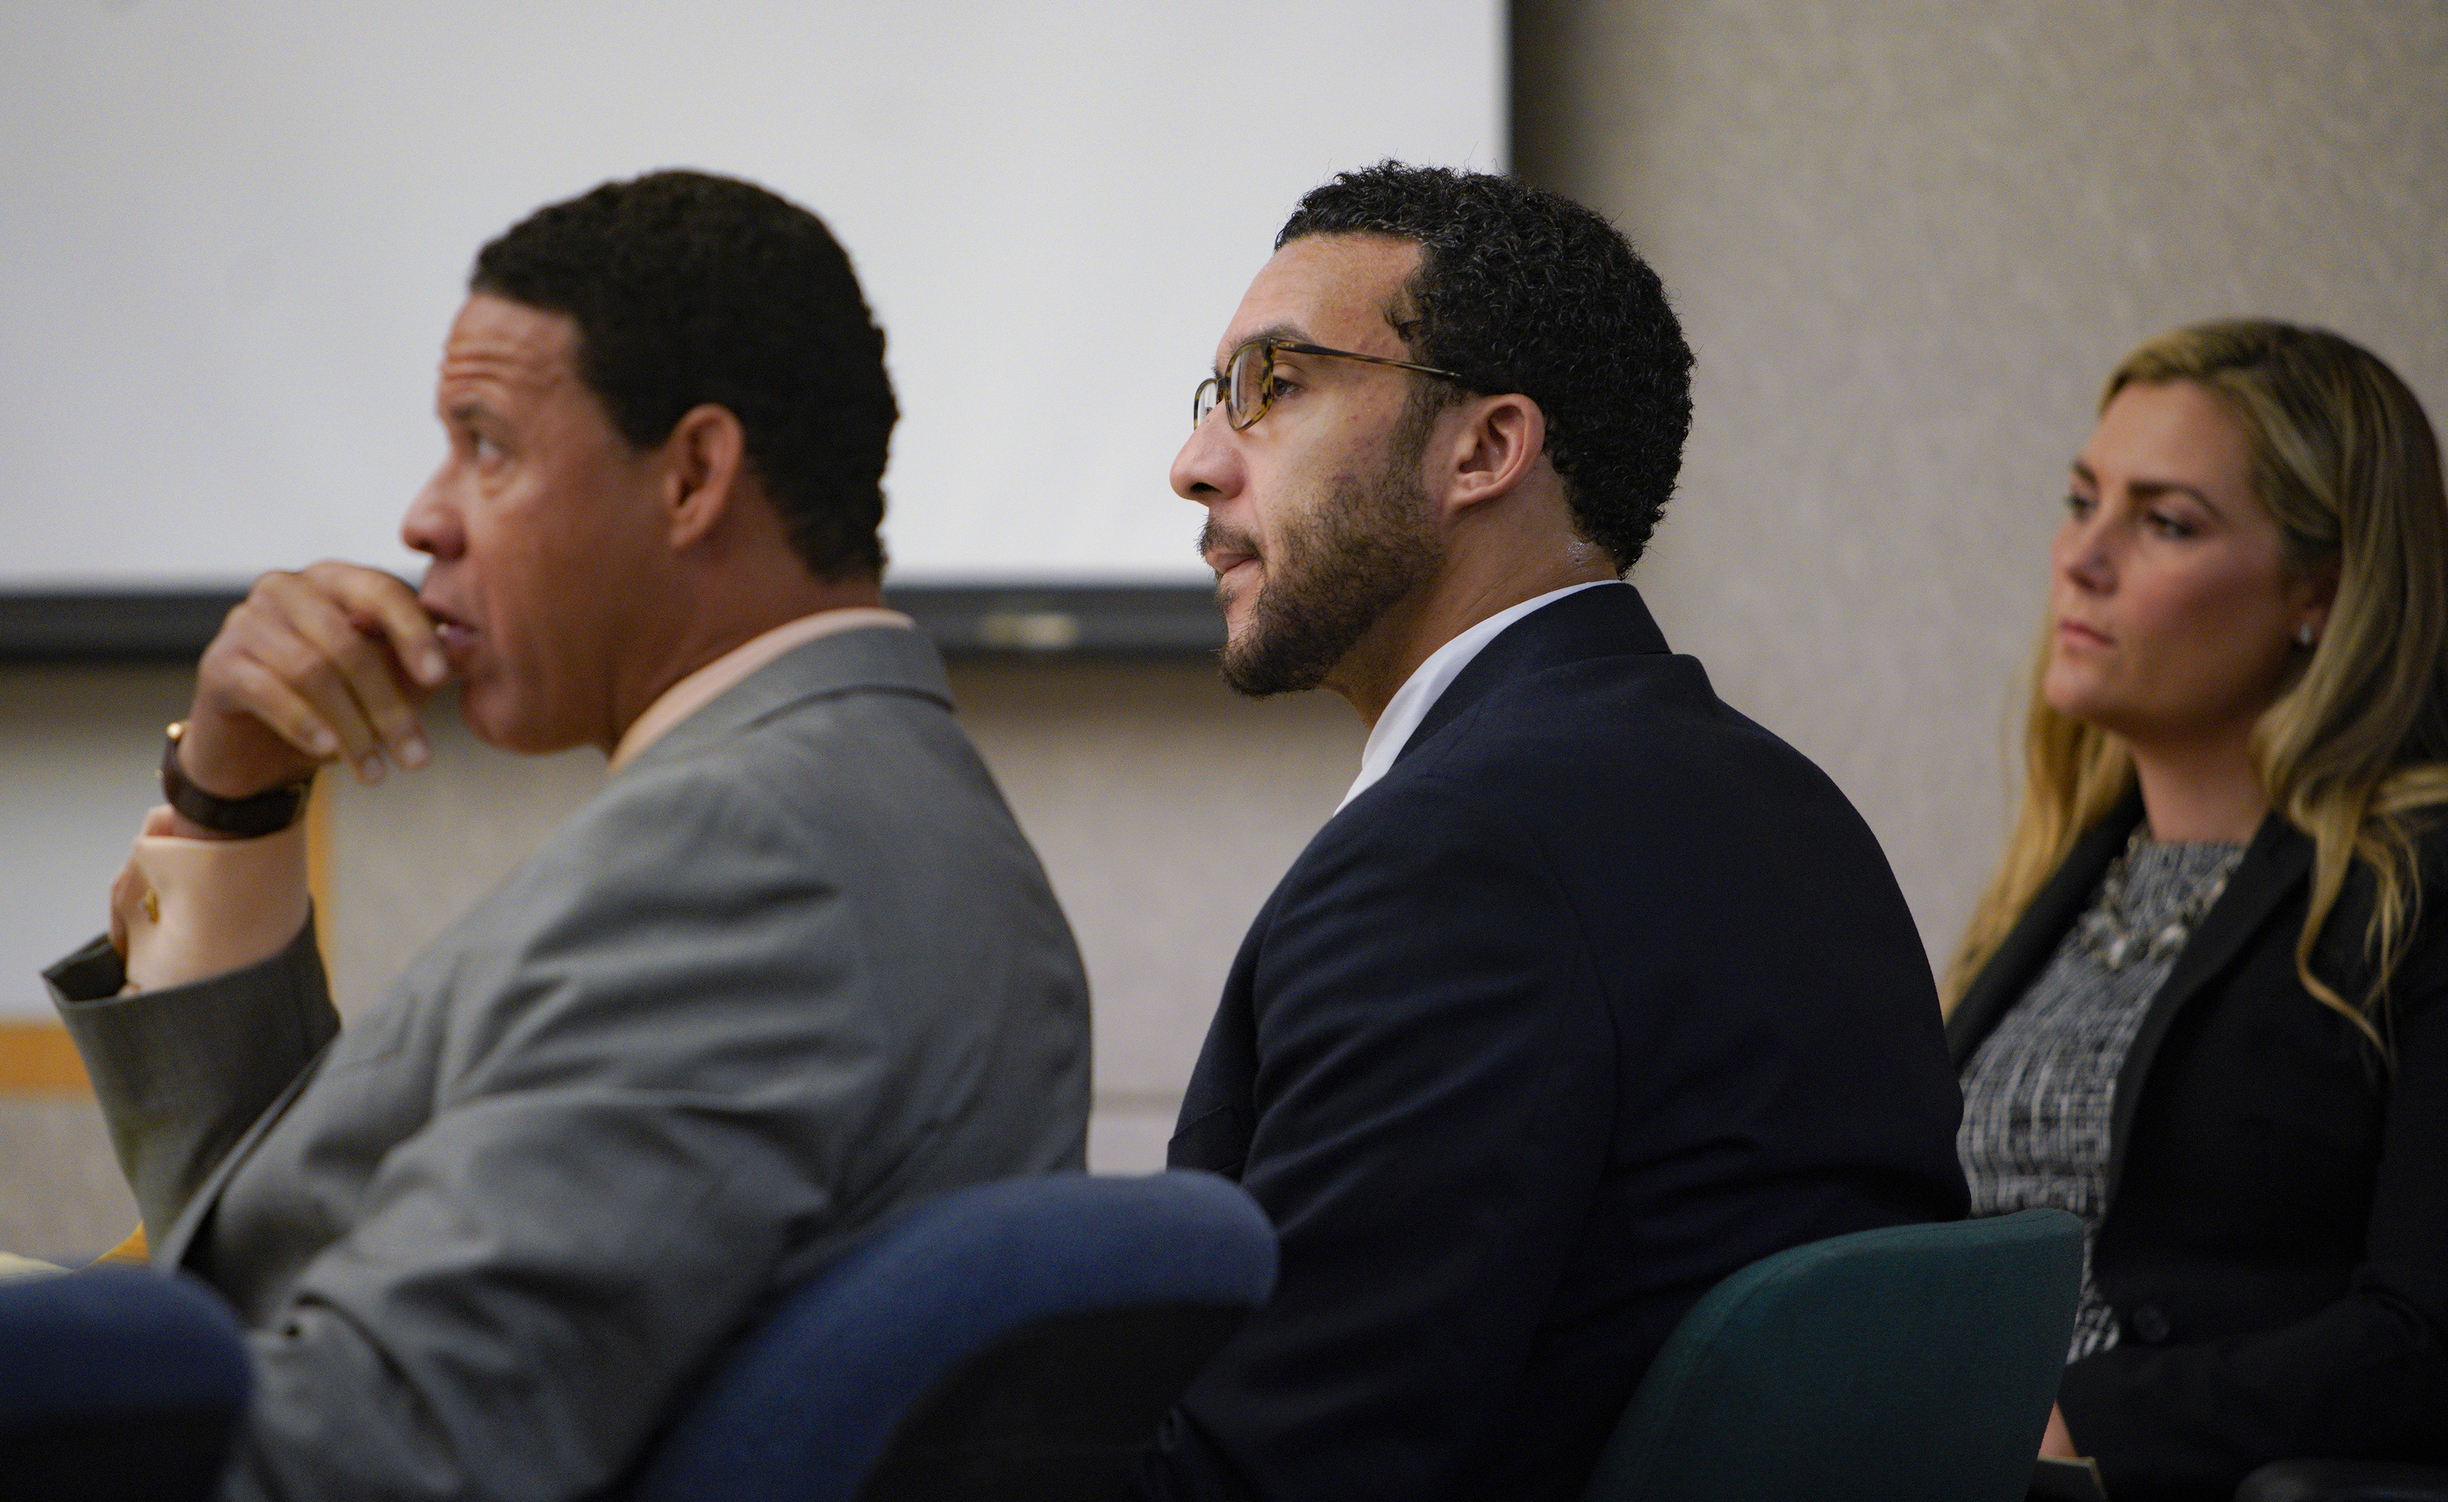 PHOTO: Sitting in Superior Court in Vista, Kellen Winslow, Jr., is flanked by defense attorneys Brian Watkins and Elizabeth Bahr as he listens to closing arguments to jury from Deputy District Attorney, Dan Owens on Tuesday, June 4, 2019, in Vista, Calif.